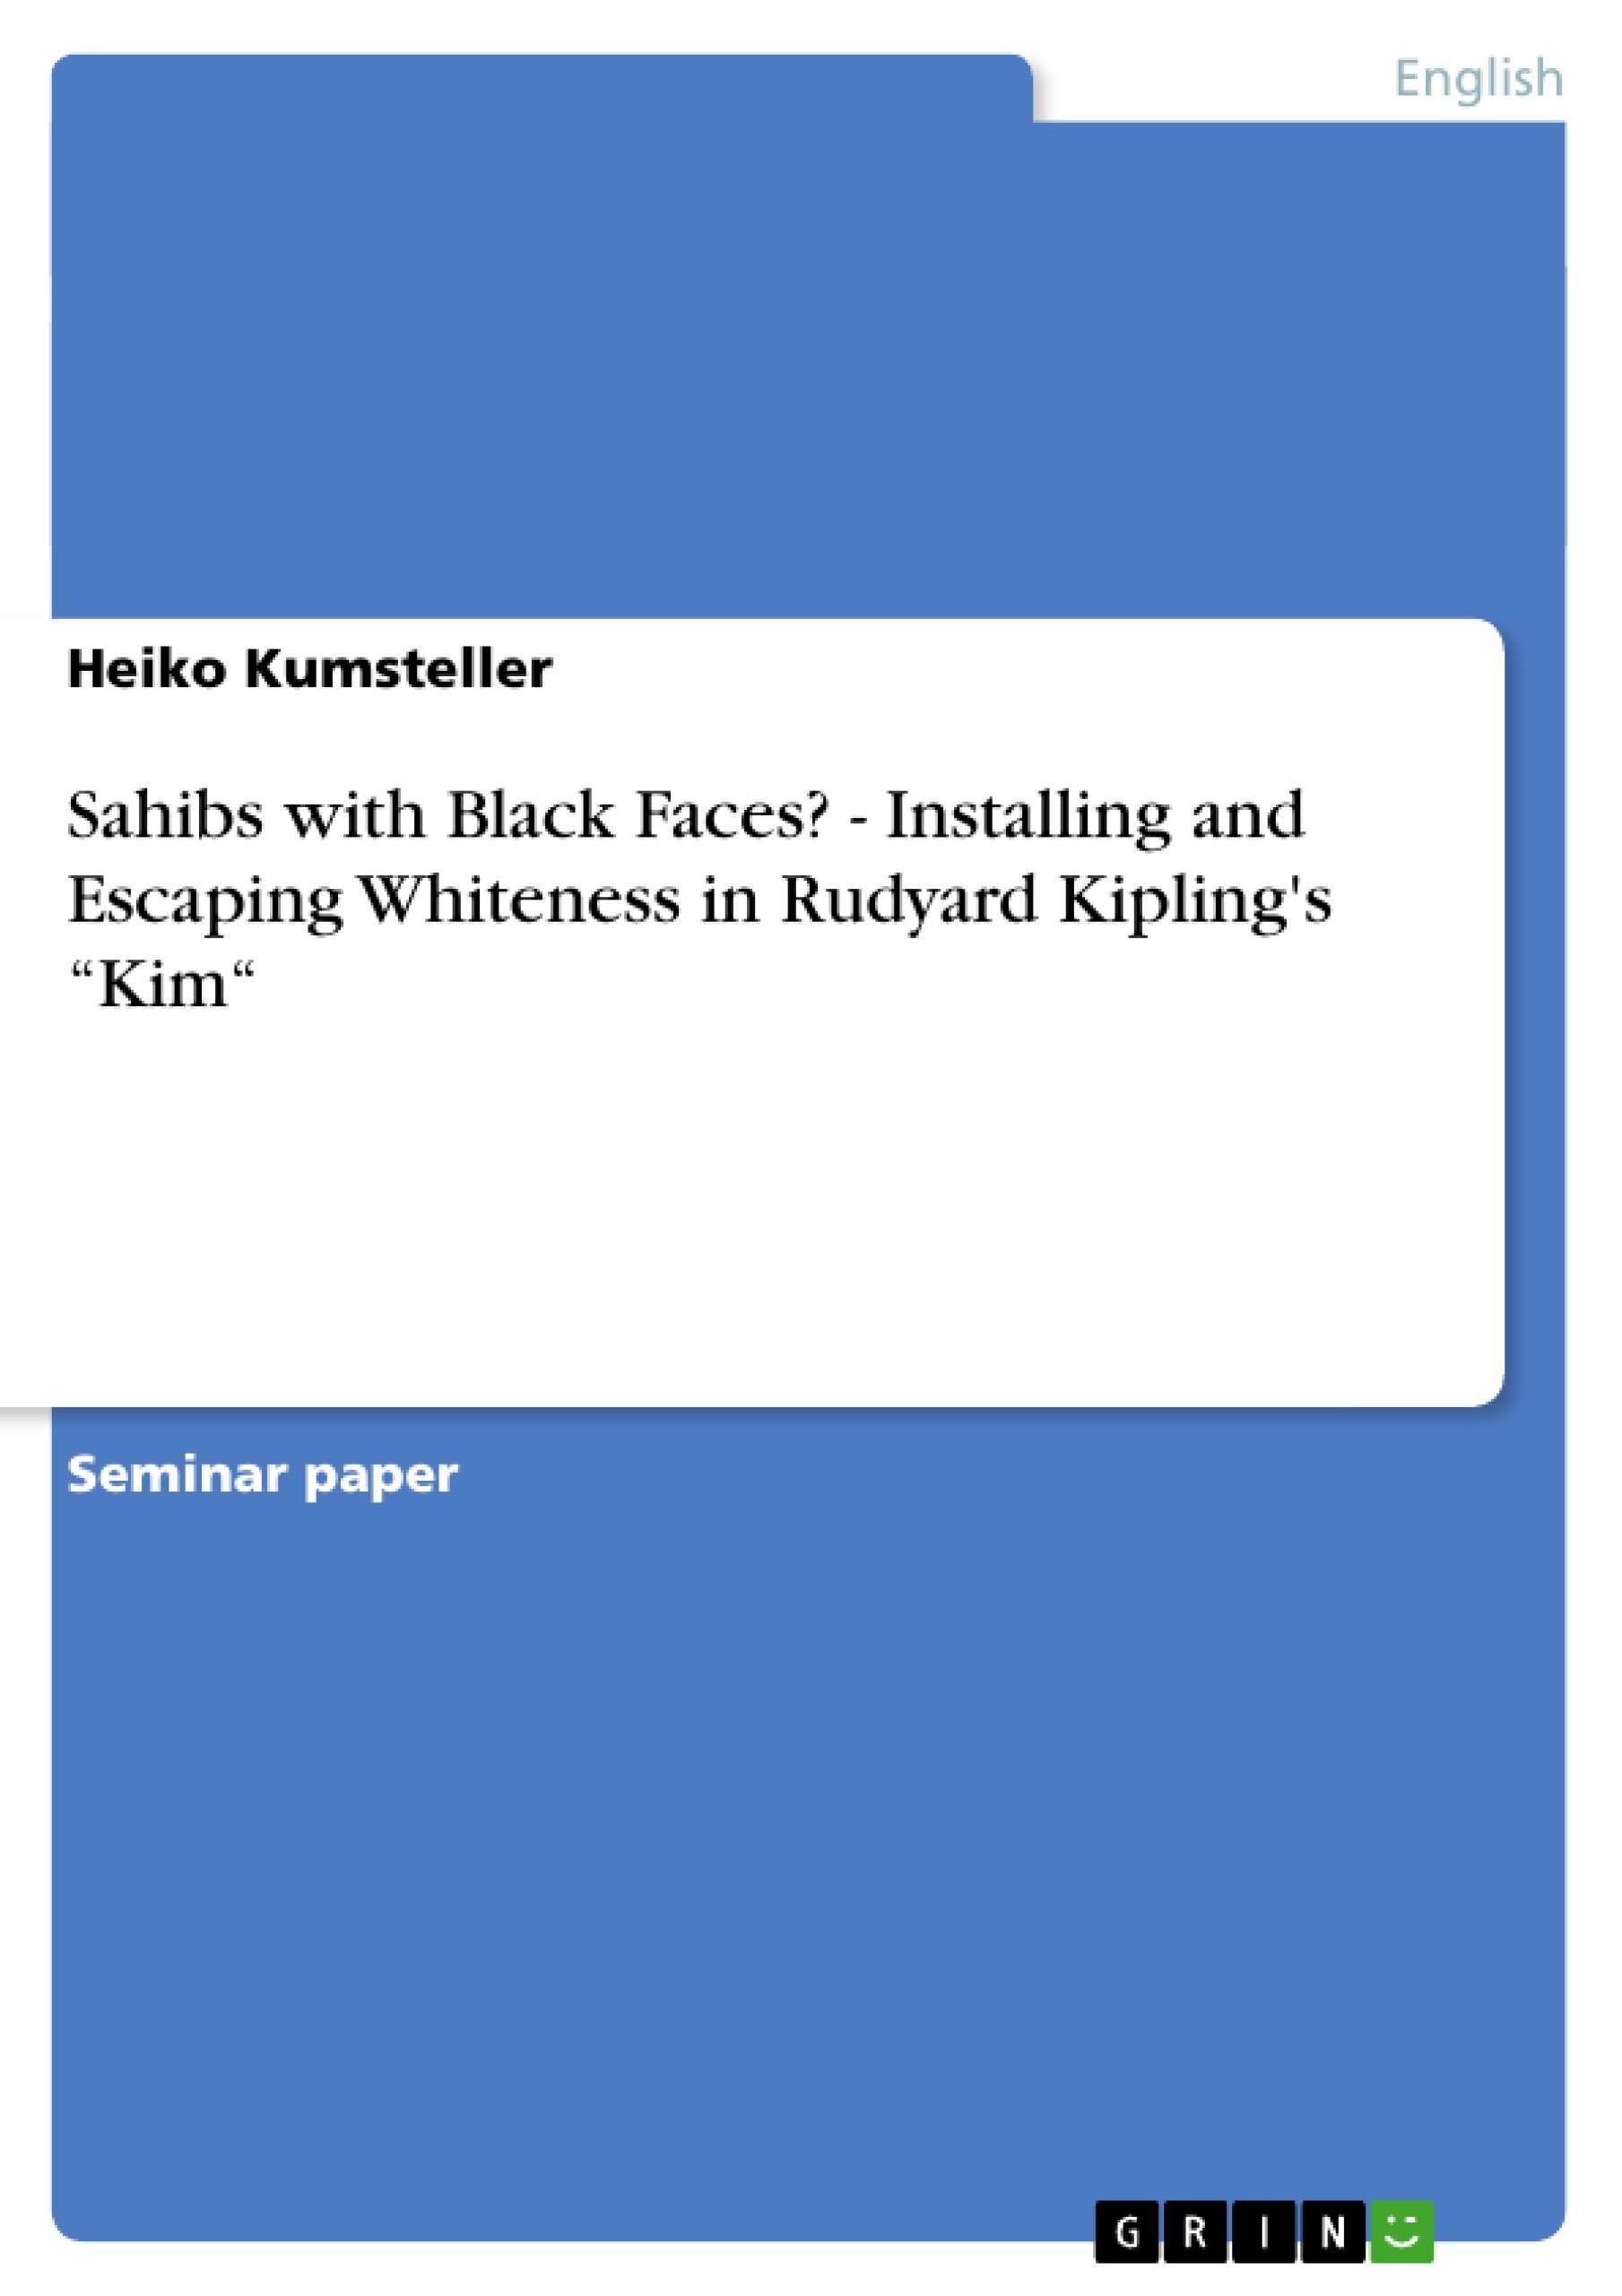 Titre: Sahibs with Black Faces? - Installing and Escaping Whiteness in Rudyard Kipling's “Kim“